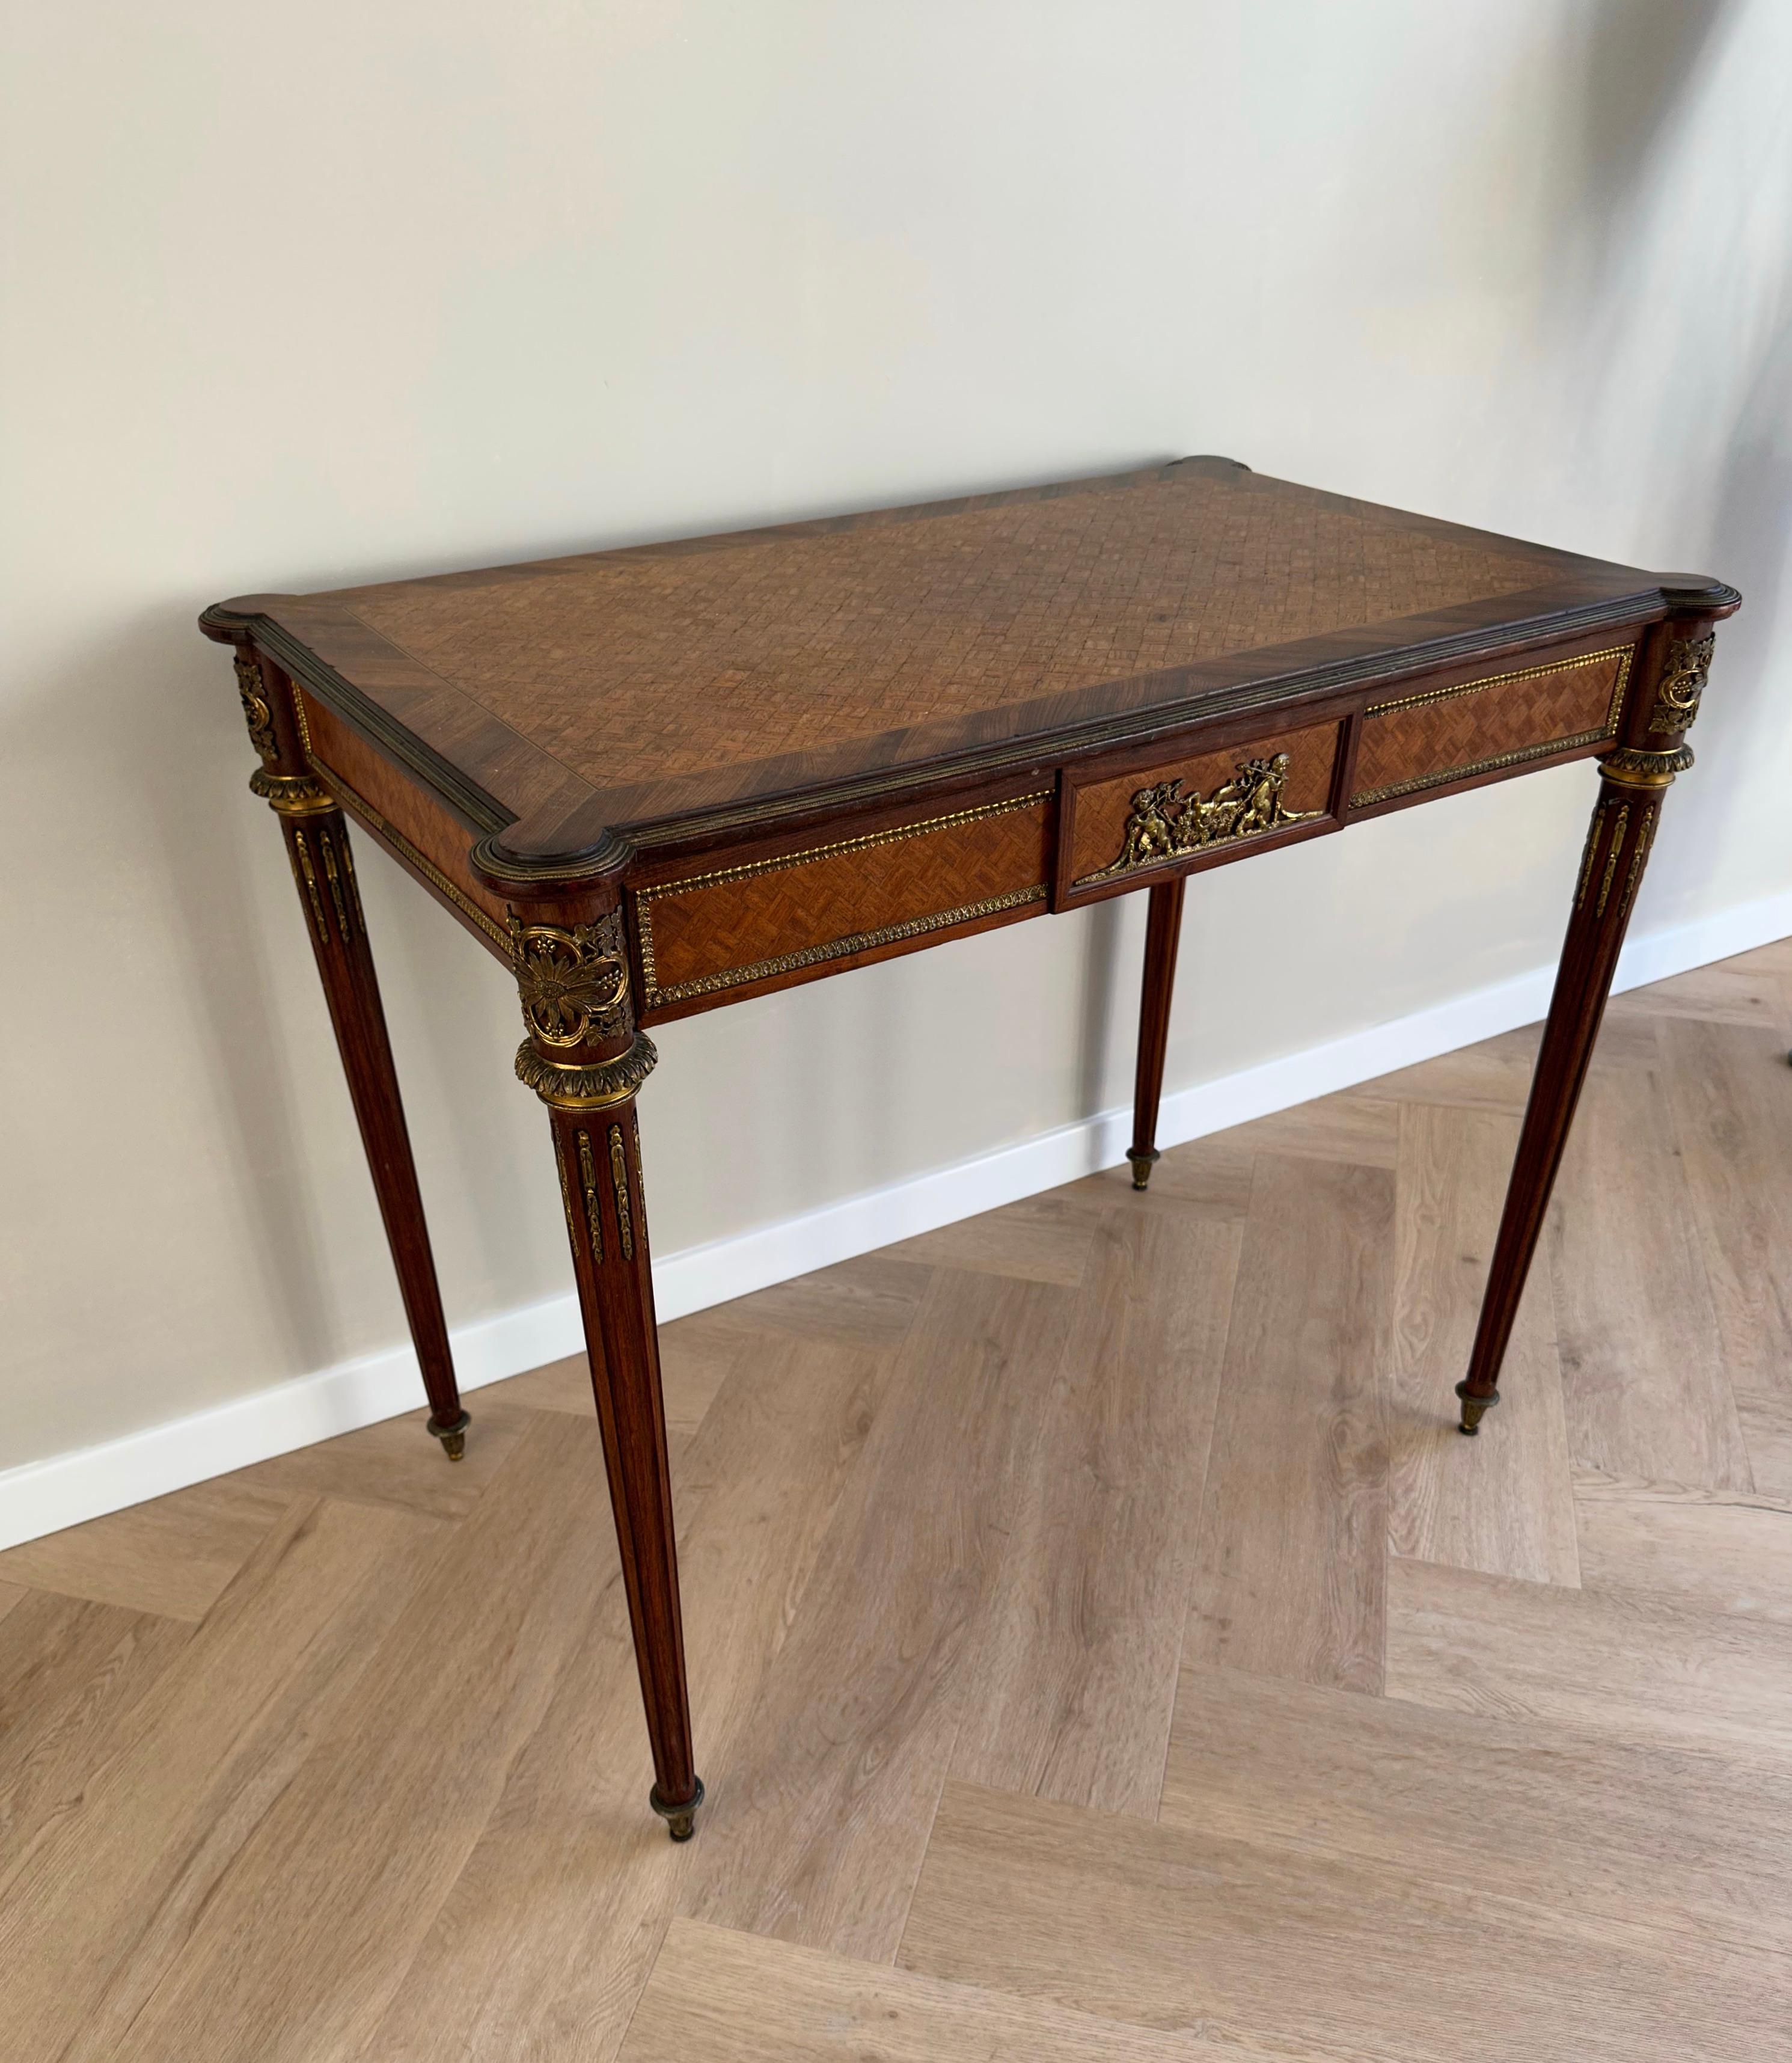 Cast Stylish French, Napoleon III Fine Ladies Writing Desk with Wine / Bacchus Theme For Sale